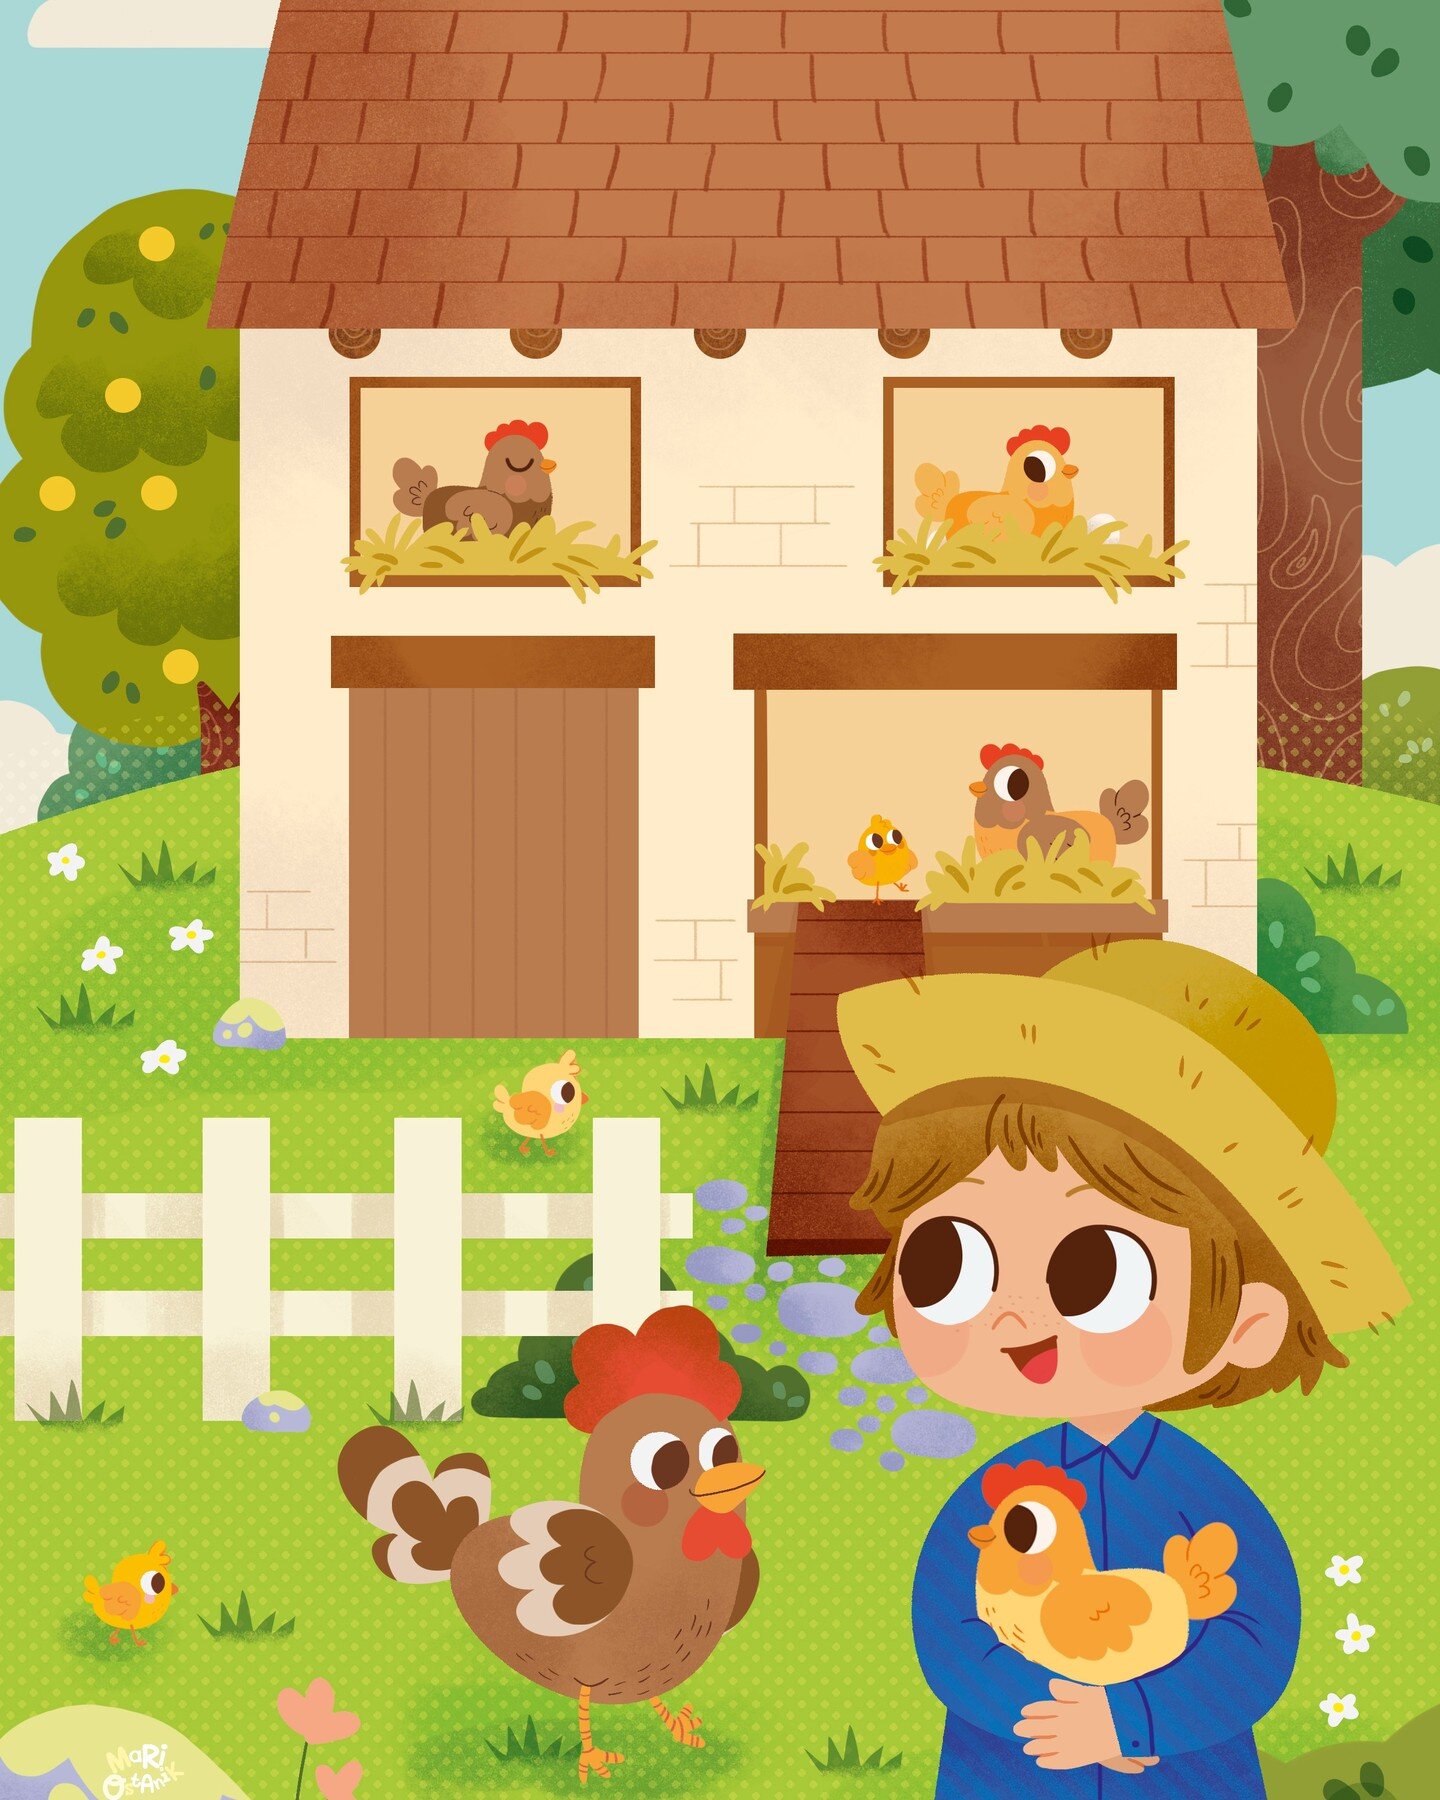 Let's add a touch of cuteness to your Friday with this adorable farm scene! 🐔 
.
.
.
#kidlitart #kidlitillustration #kidliartpostcard #childrenillustration #childrensbooksillustration #boardbooks #activitybooks #puzzles